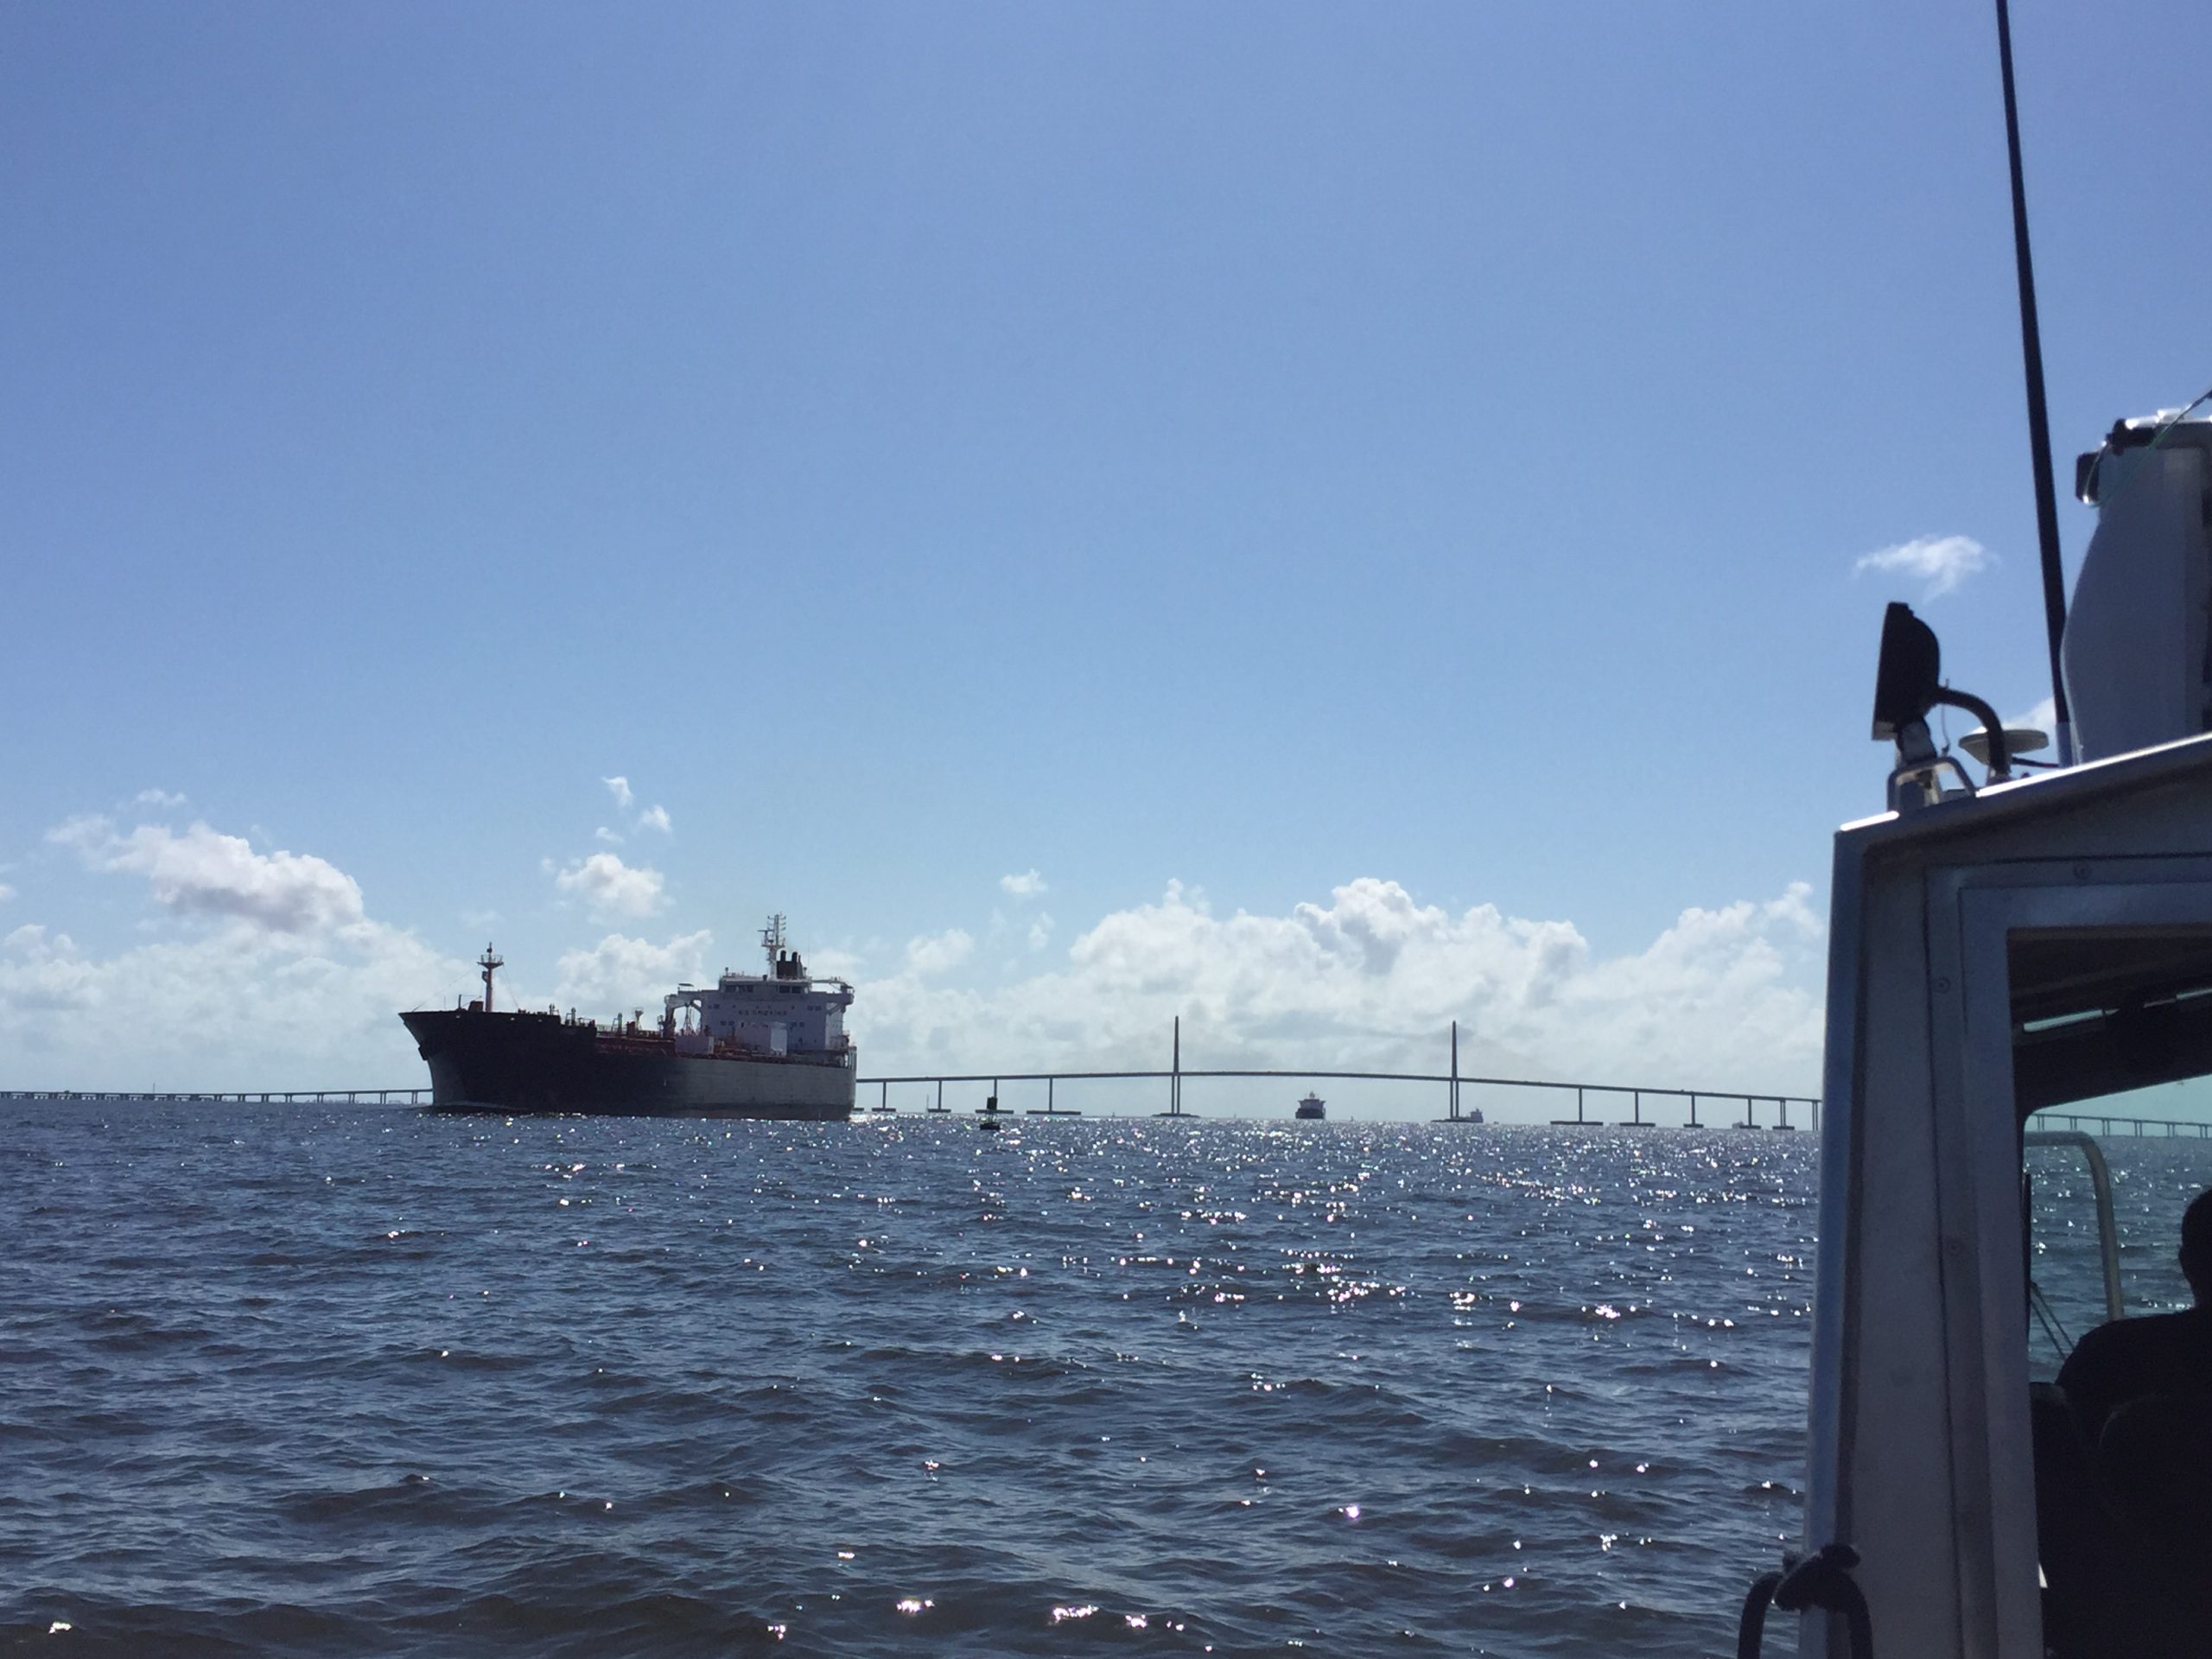 View of the first fuel ship entering the Port of Tampa after Hurricane Irma, as it passes NRT 5.